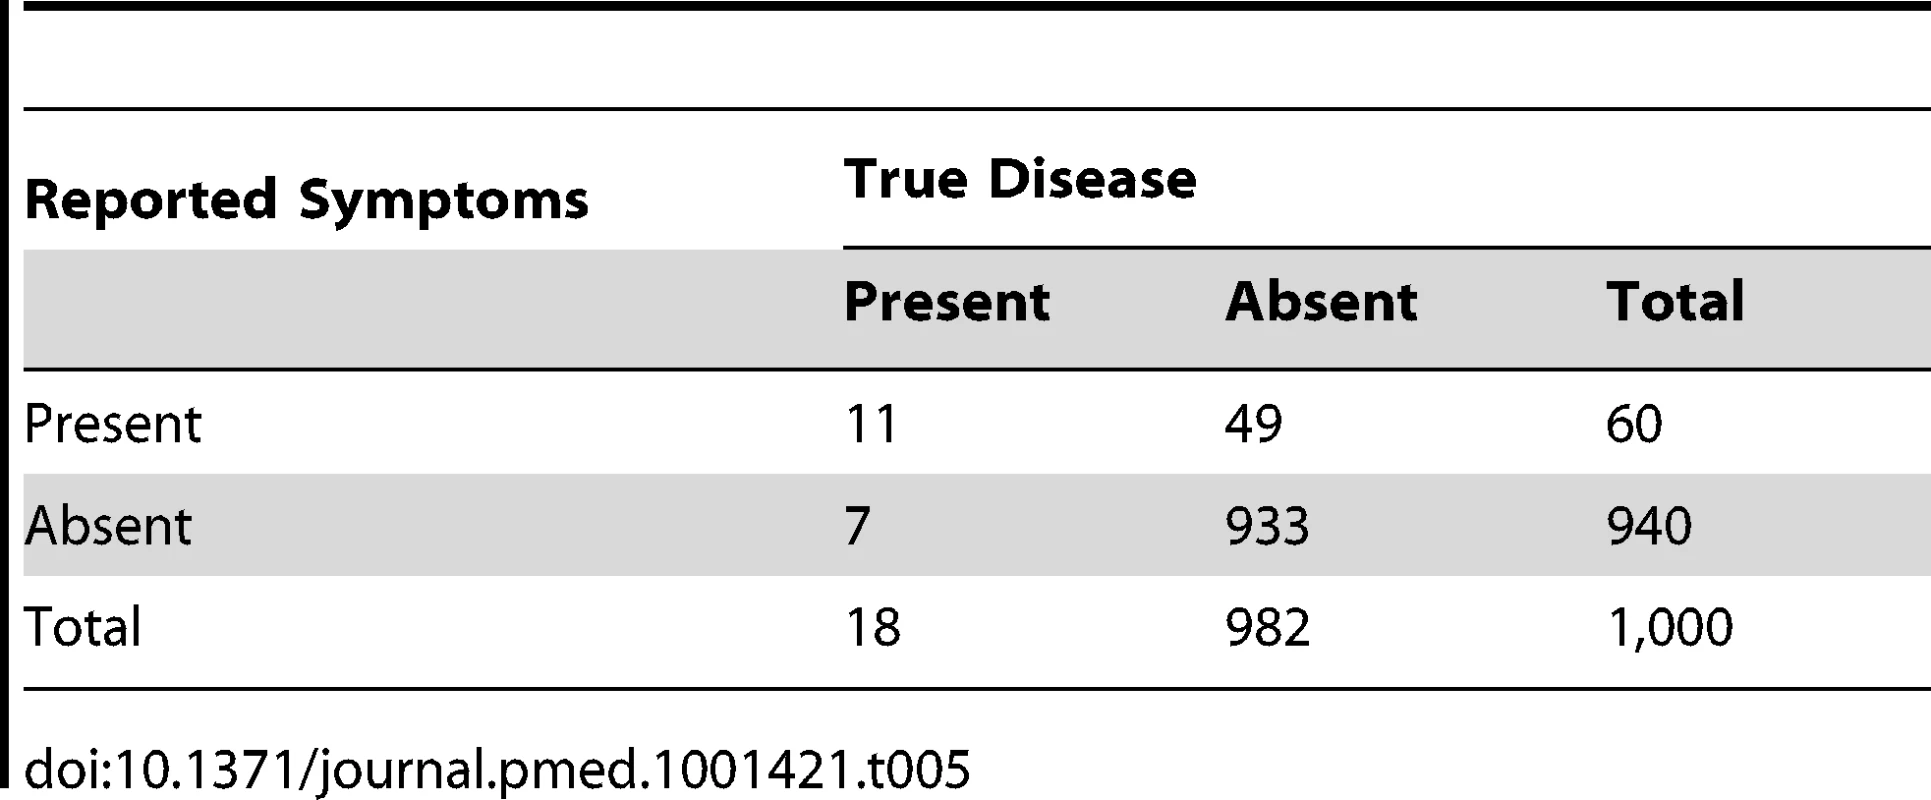 Distribution of cases of “true pneumonia” according to caregiver report of “suspected pneumonia” (test) and true disease status when test sensitivity is 60% and specificity is 95%.